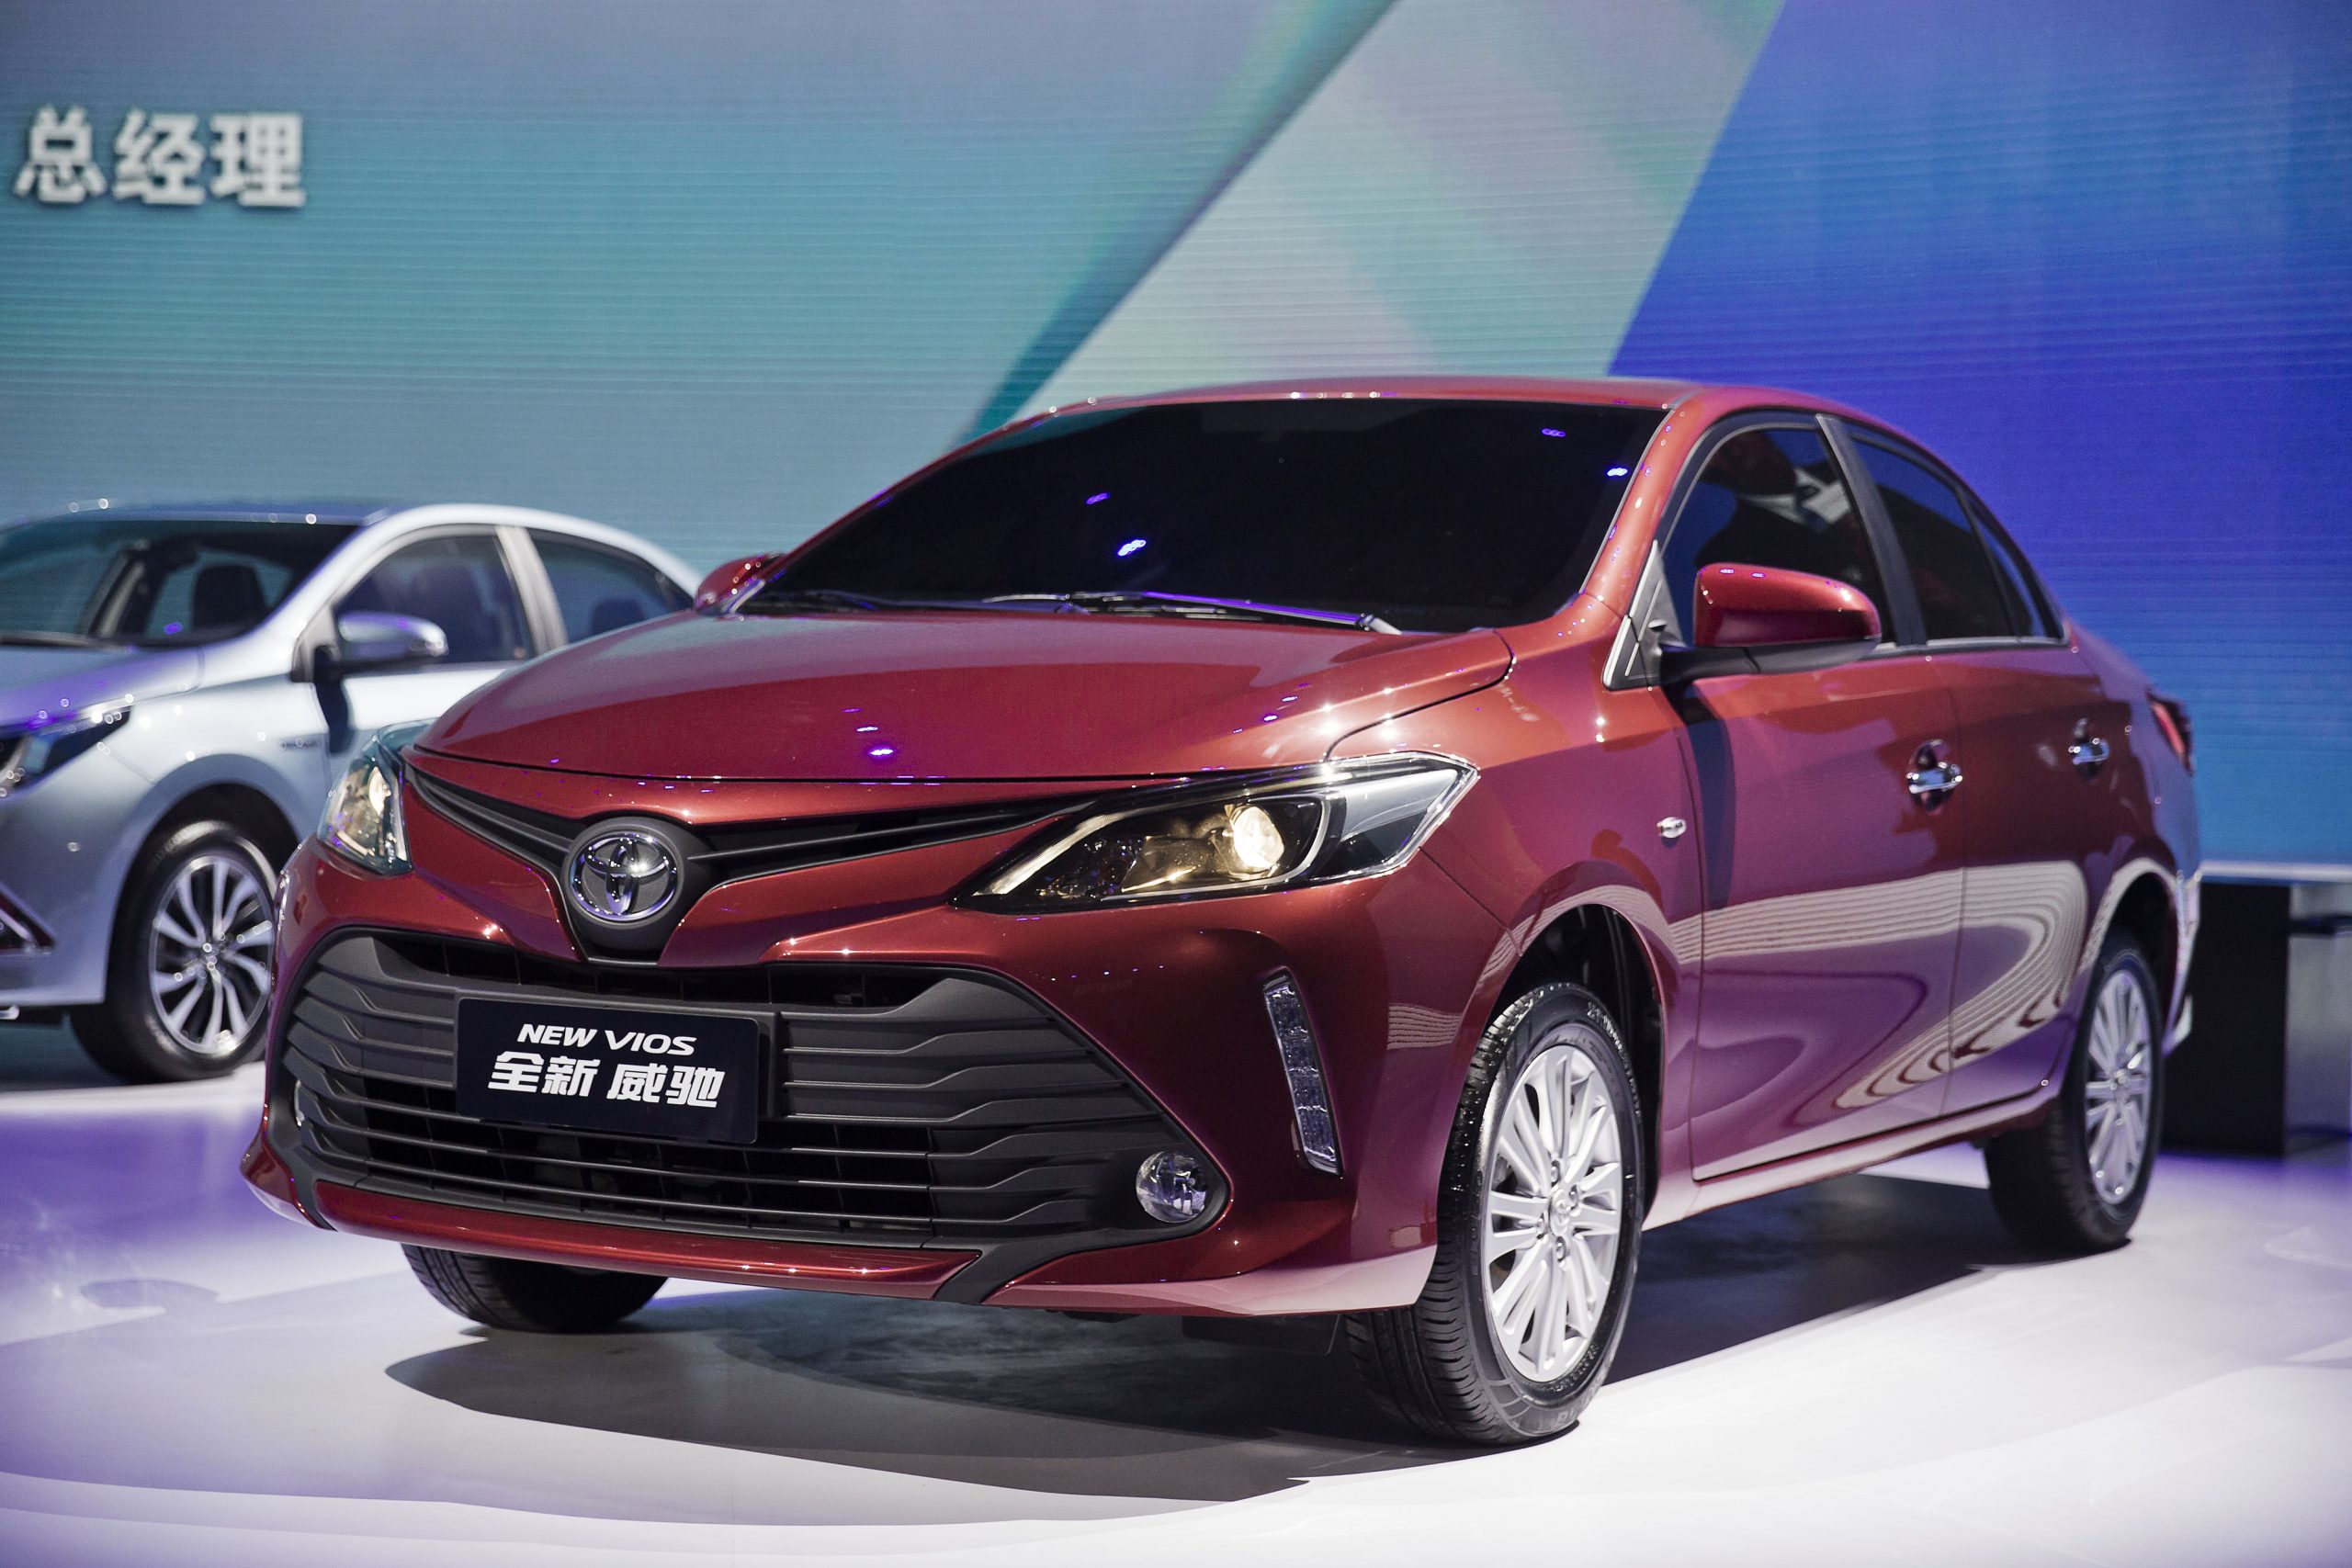 A red Toyota Vios on display